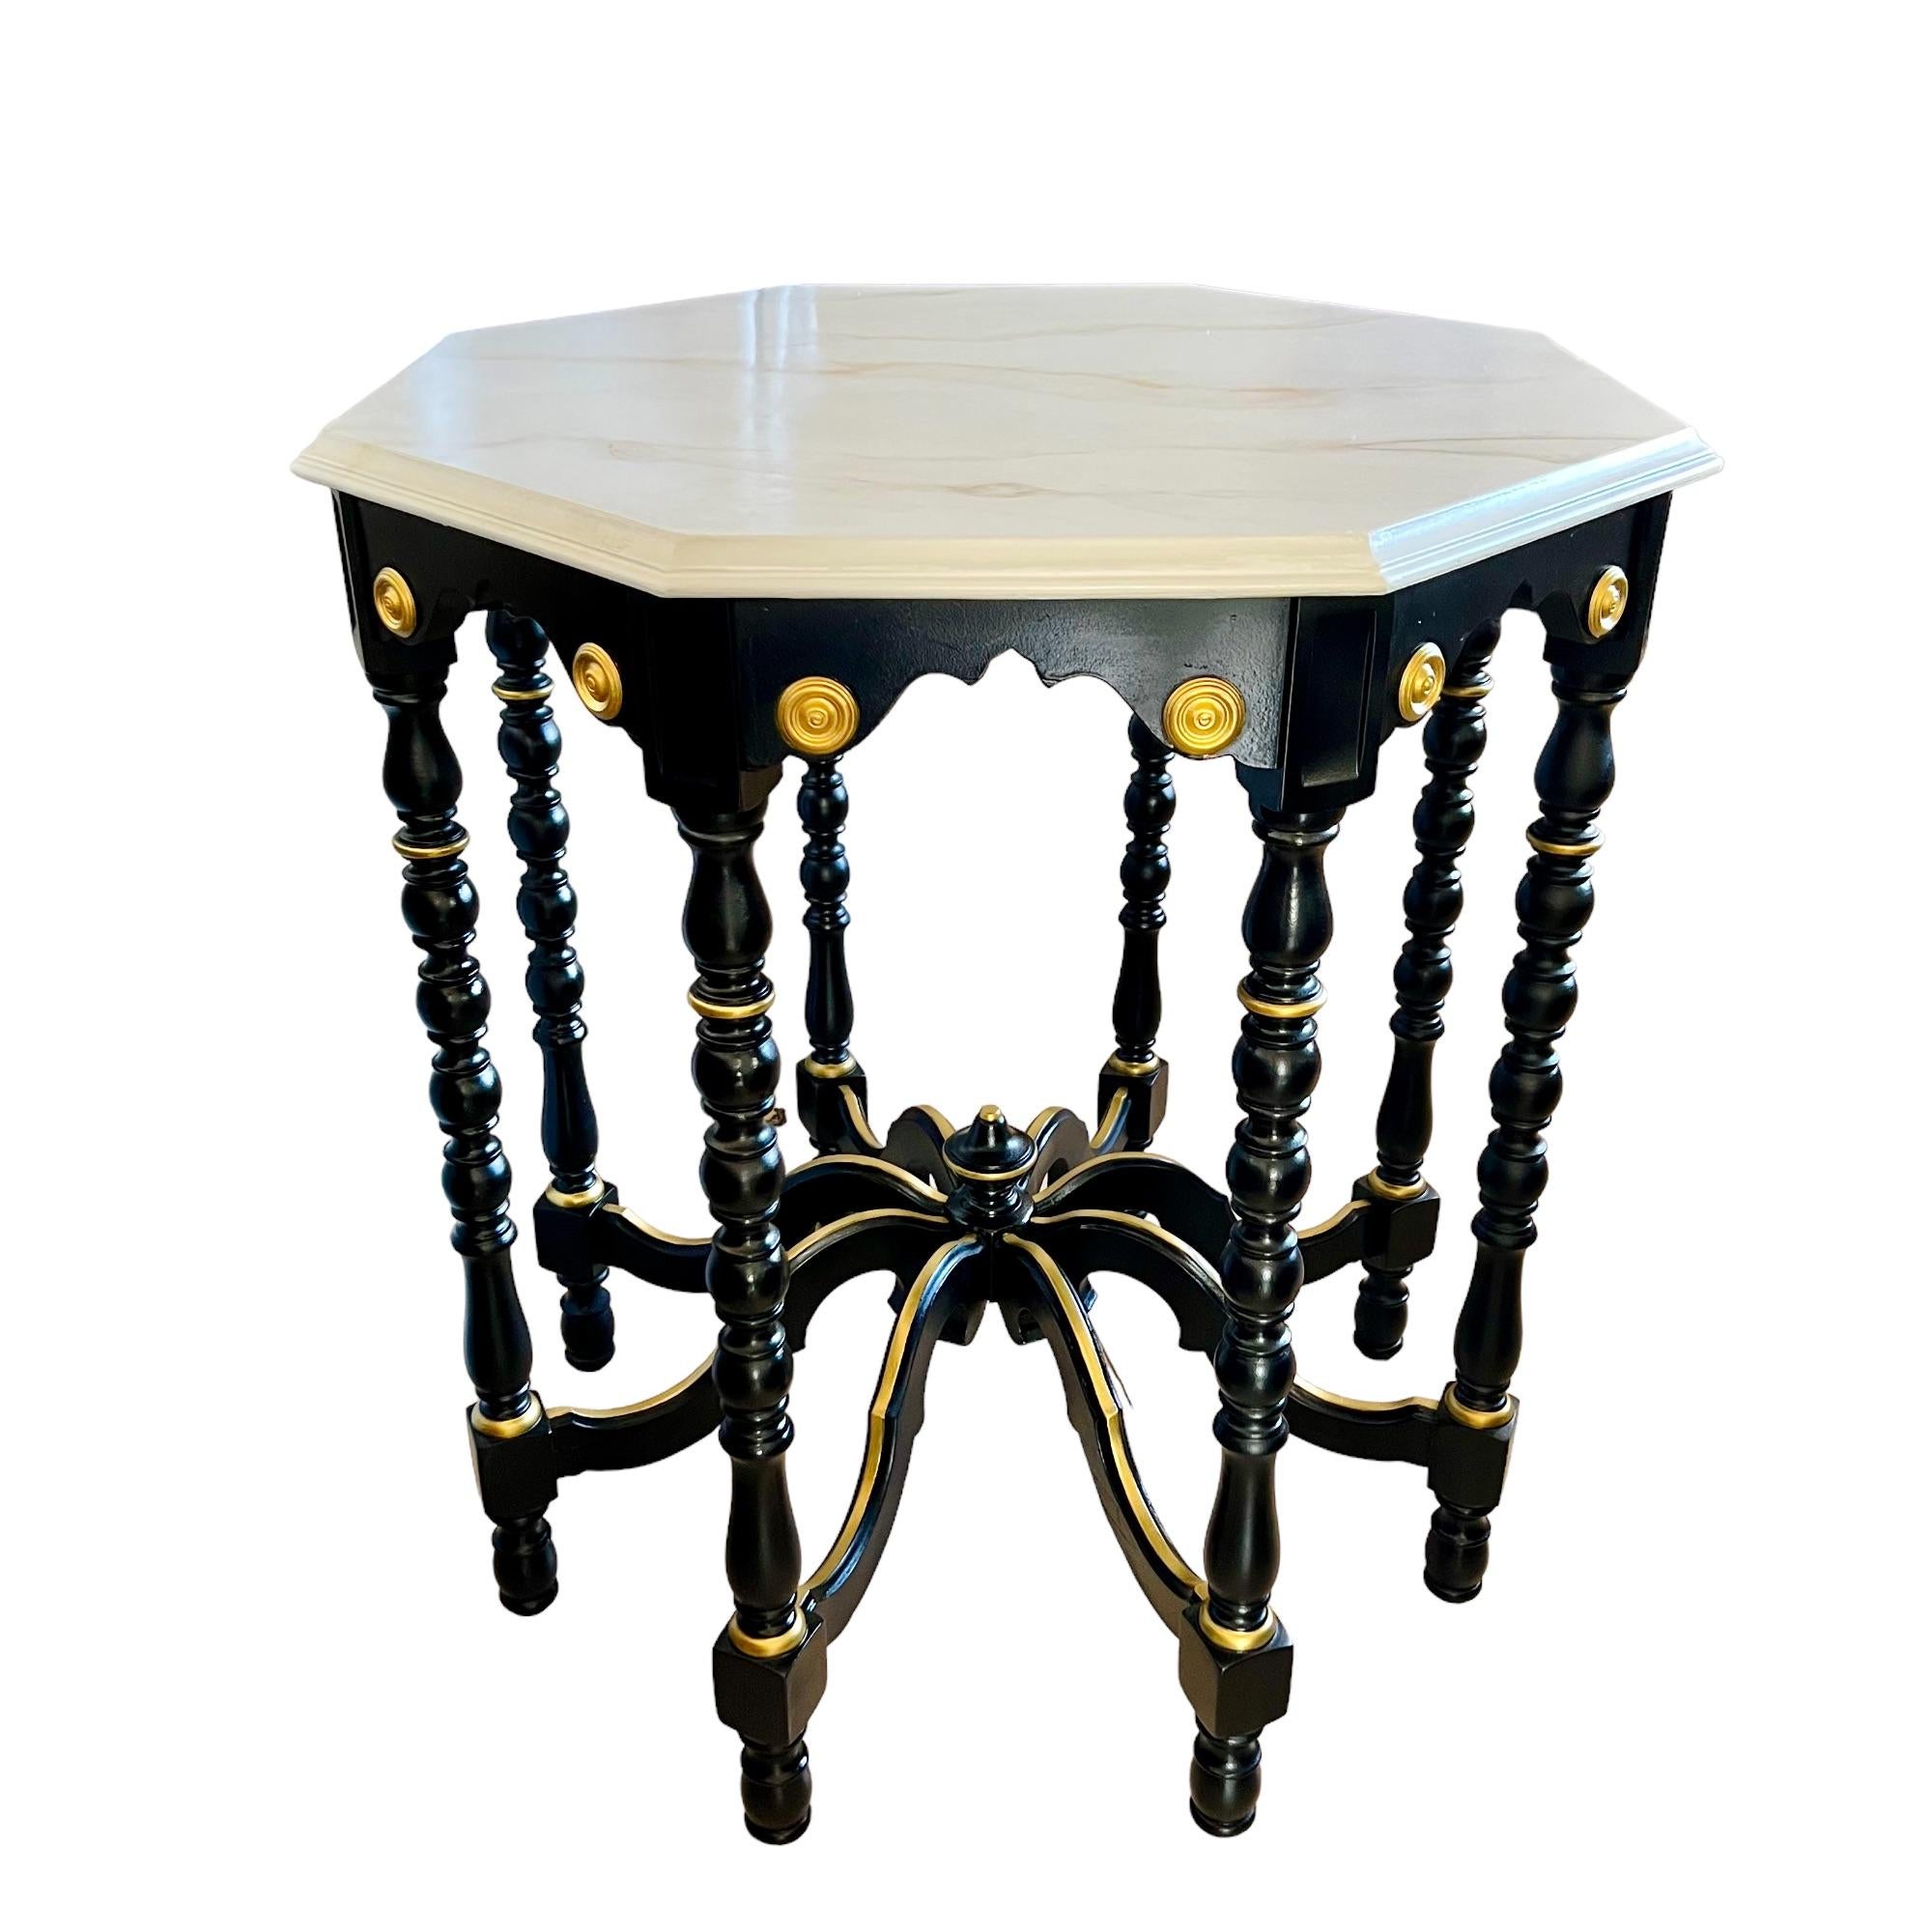 This vintage Eastlake mahogany octagonal eight leg accent table has been given a custom Regency style update featuring a hand painted faux Carrara marble beveled top in pearlescent white/cream with veins & undertones in shades of beige, gold,